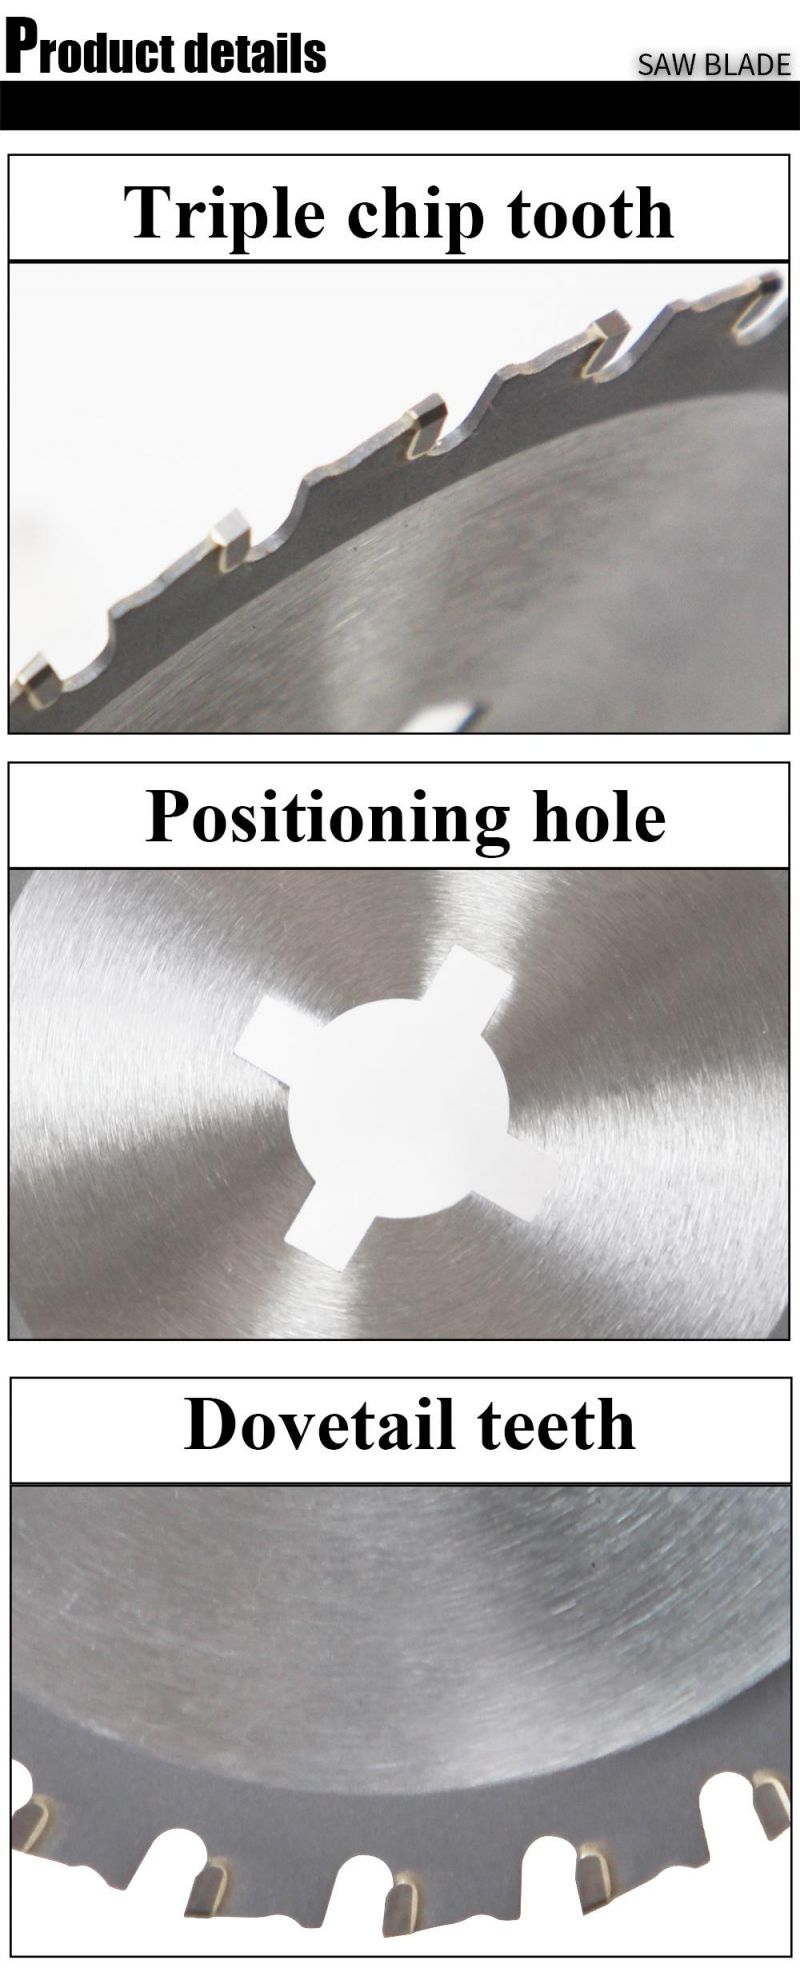 Tungsten Carbide Circular Saw Blade for Cutting Stainless Steel